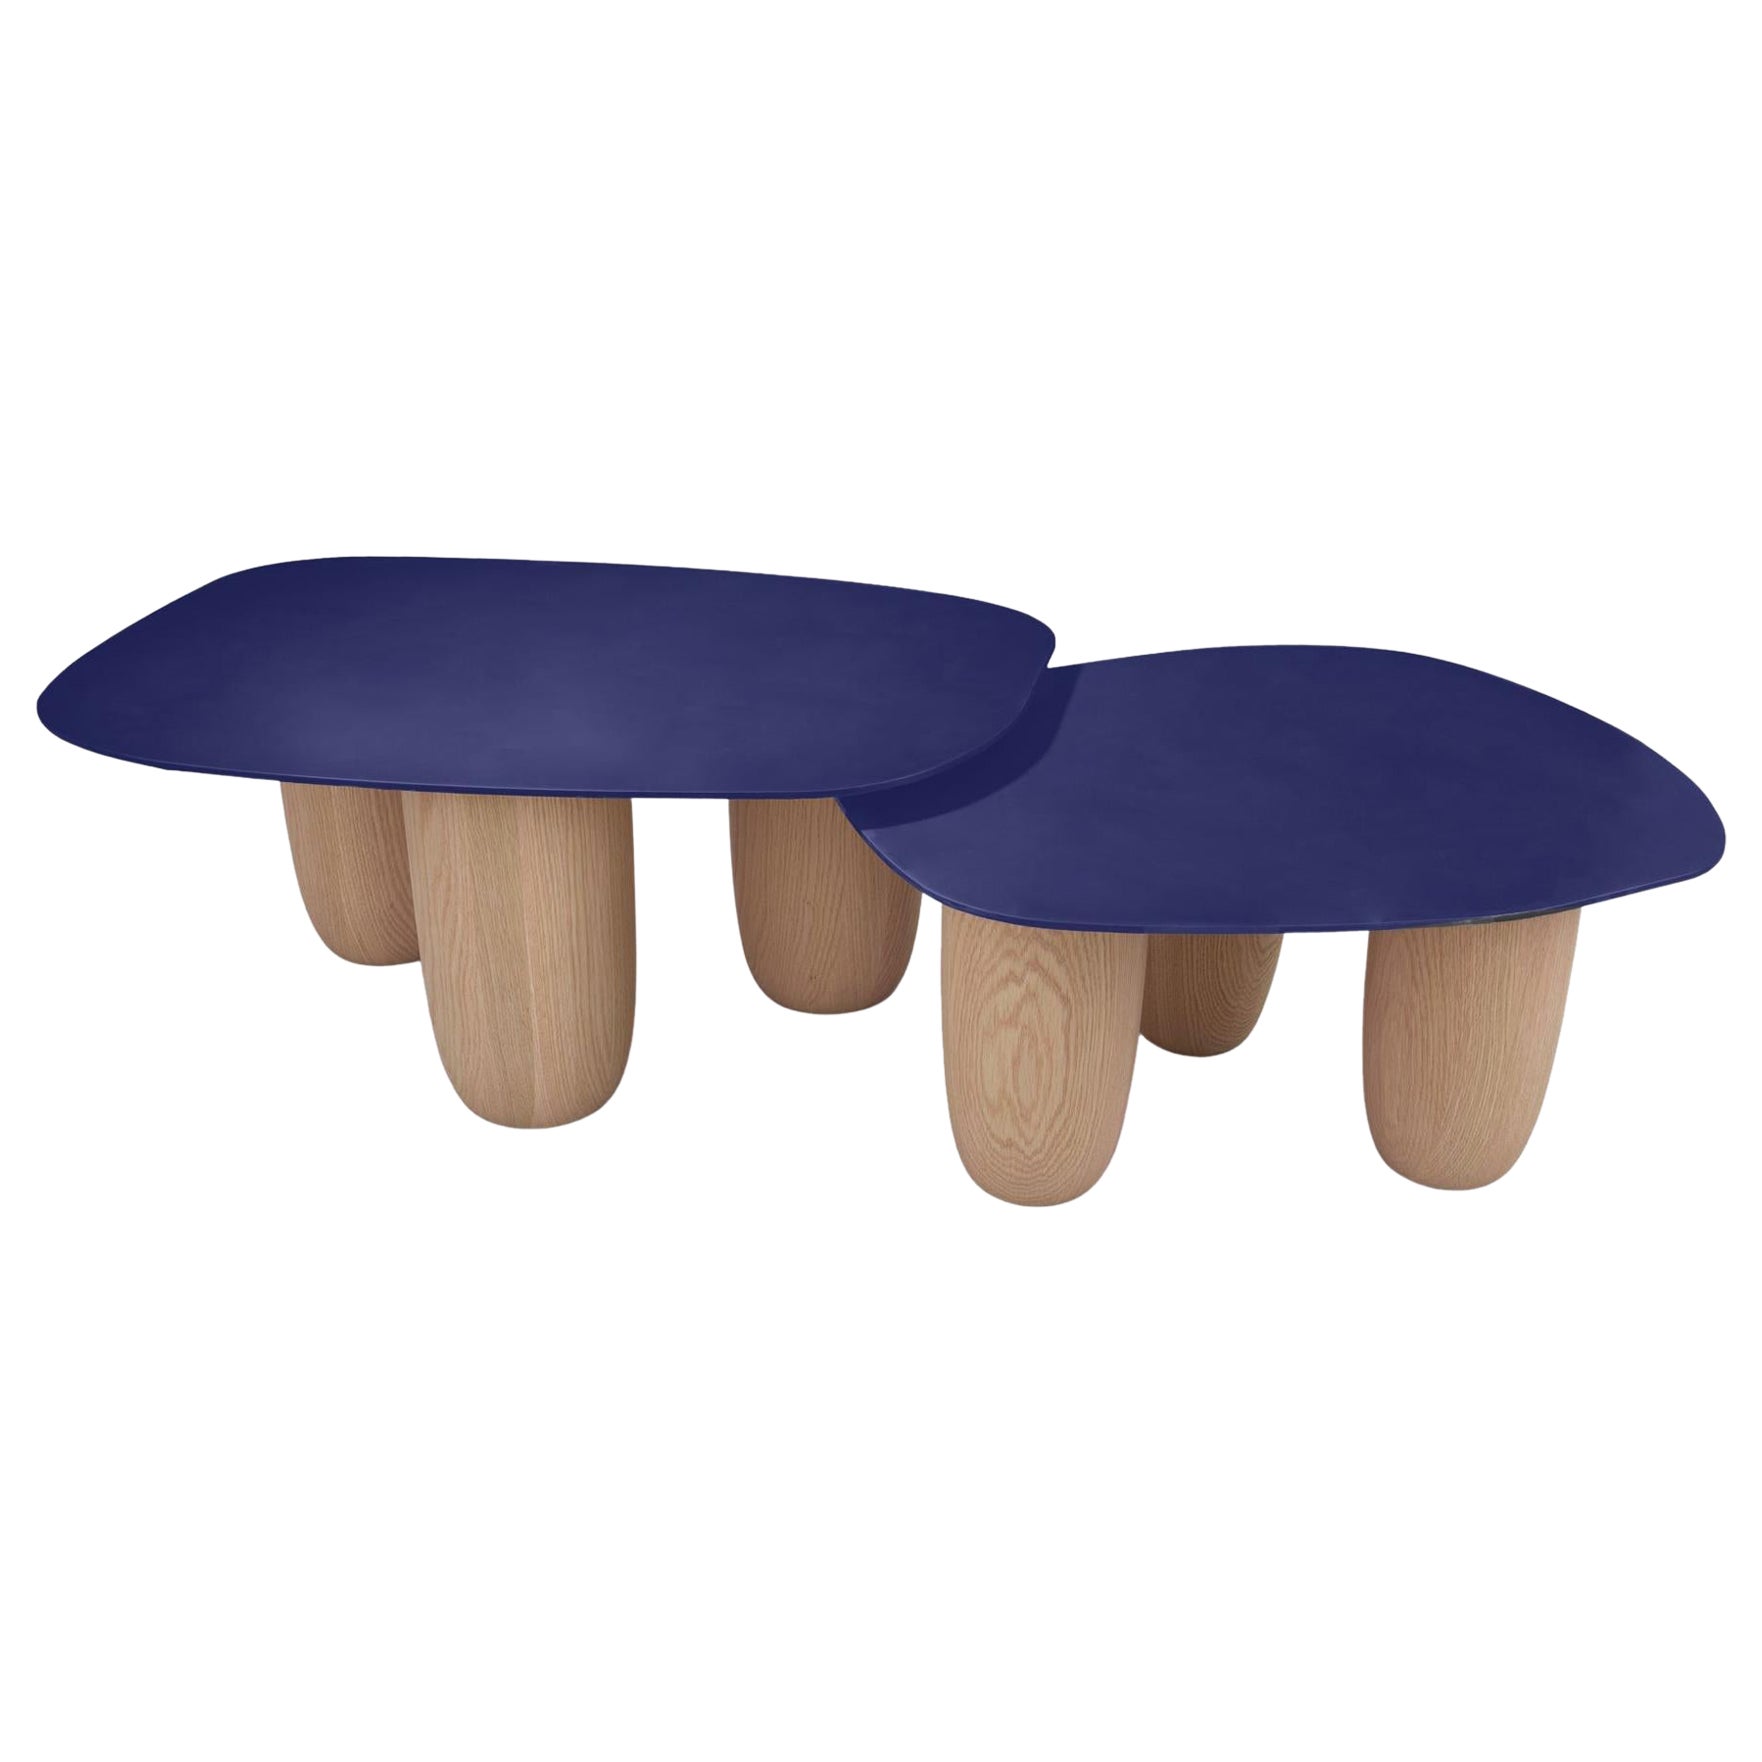 Contemporary Low Tables Blue Steel Top with Natural Oak Legs by Vivian Carbonell